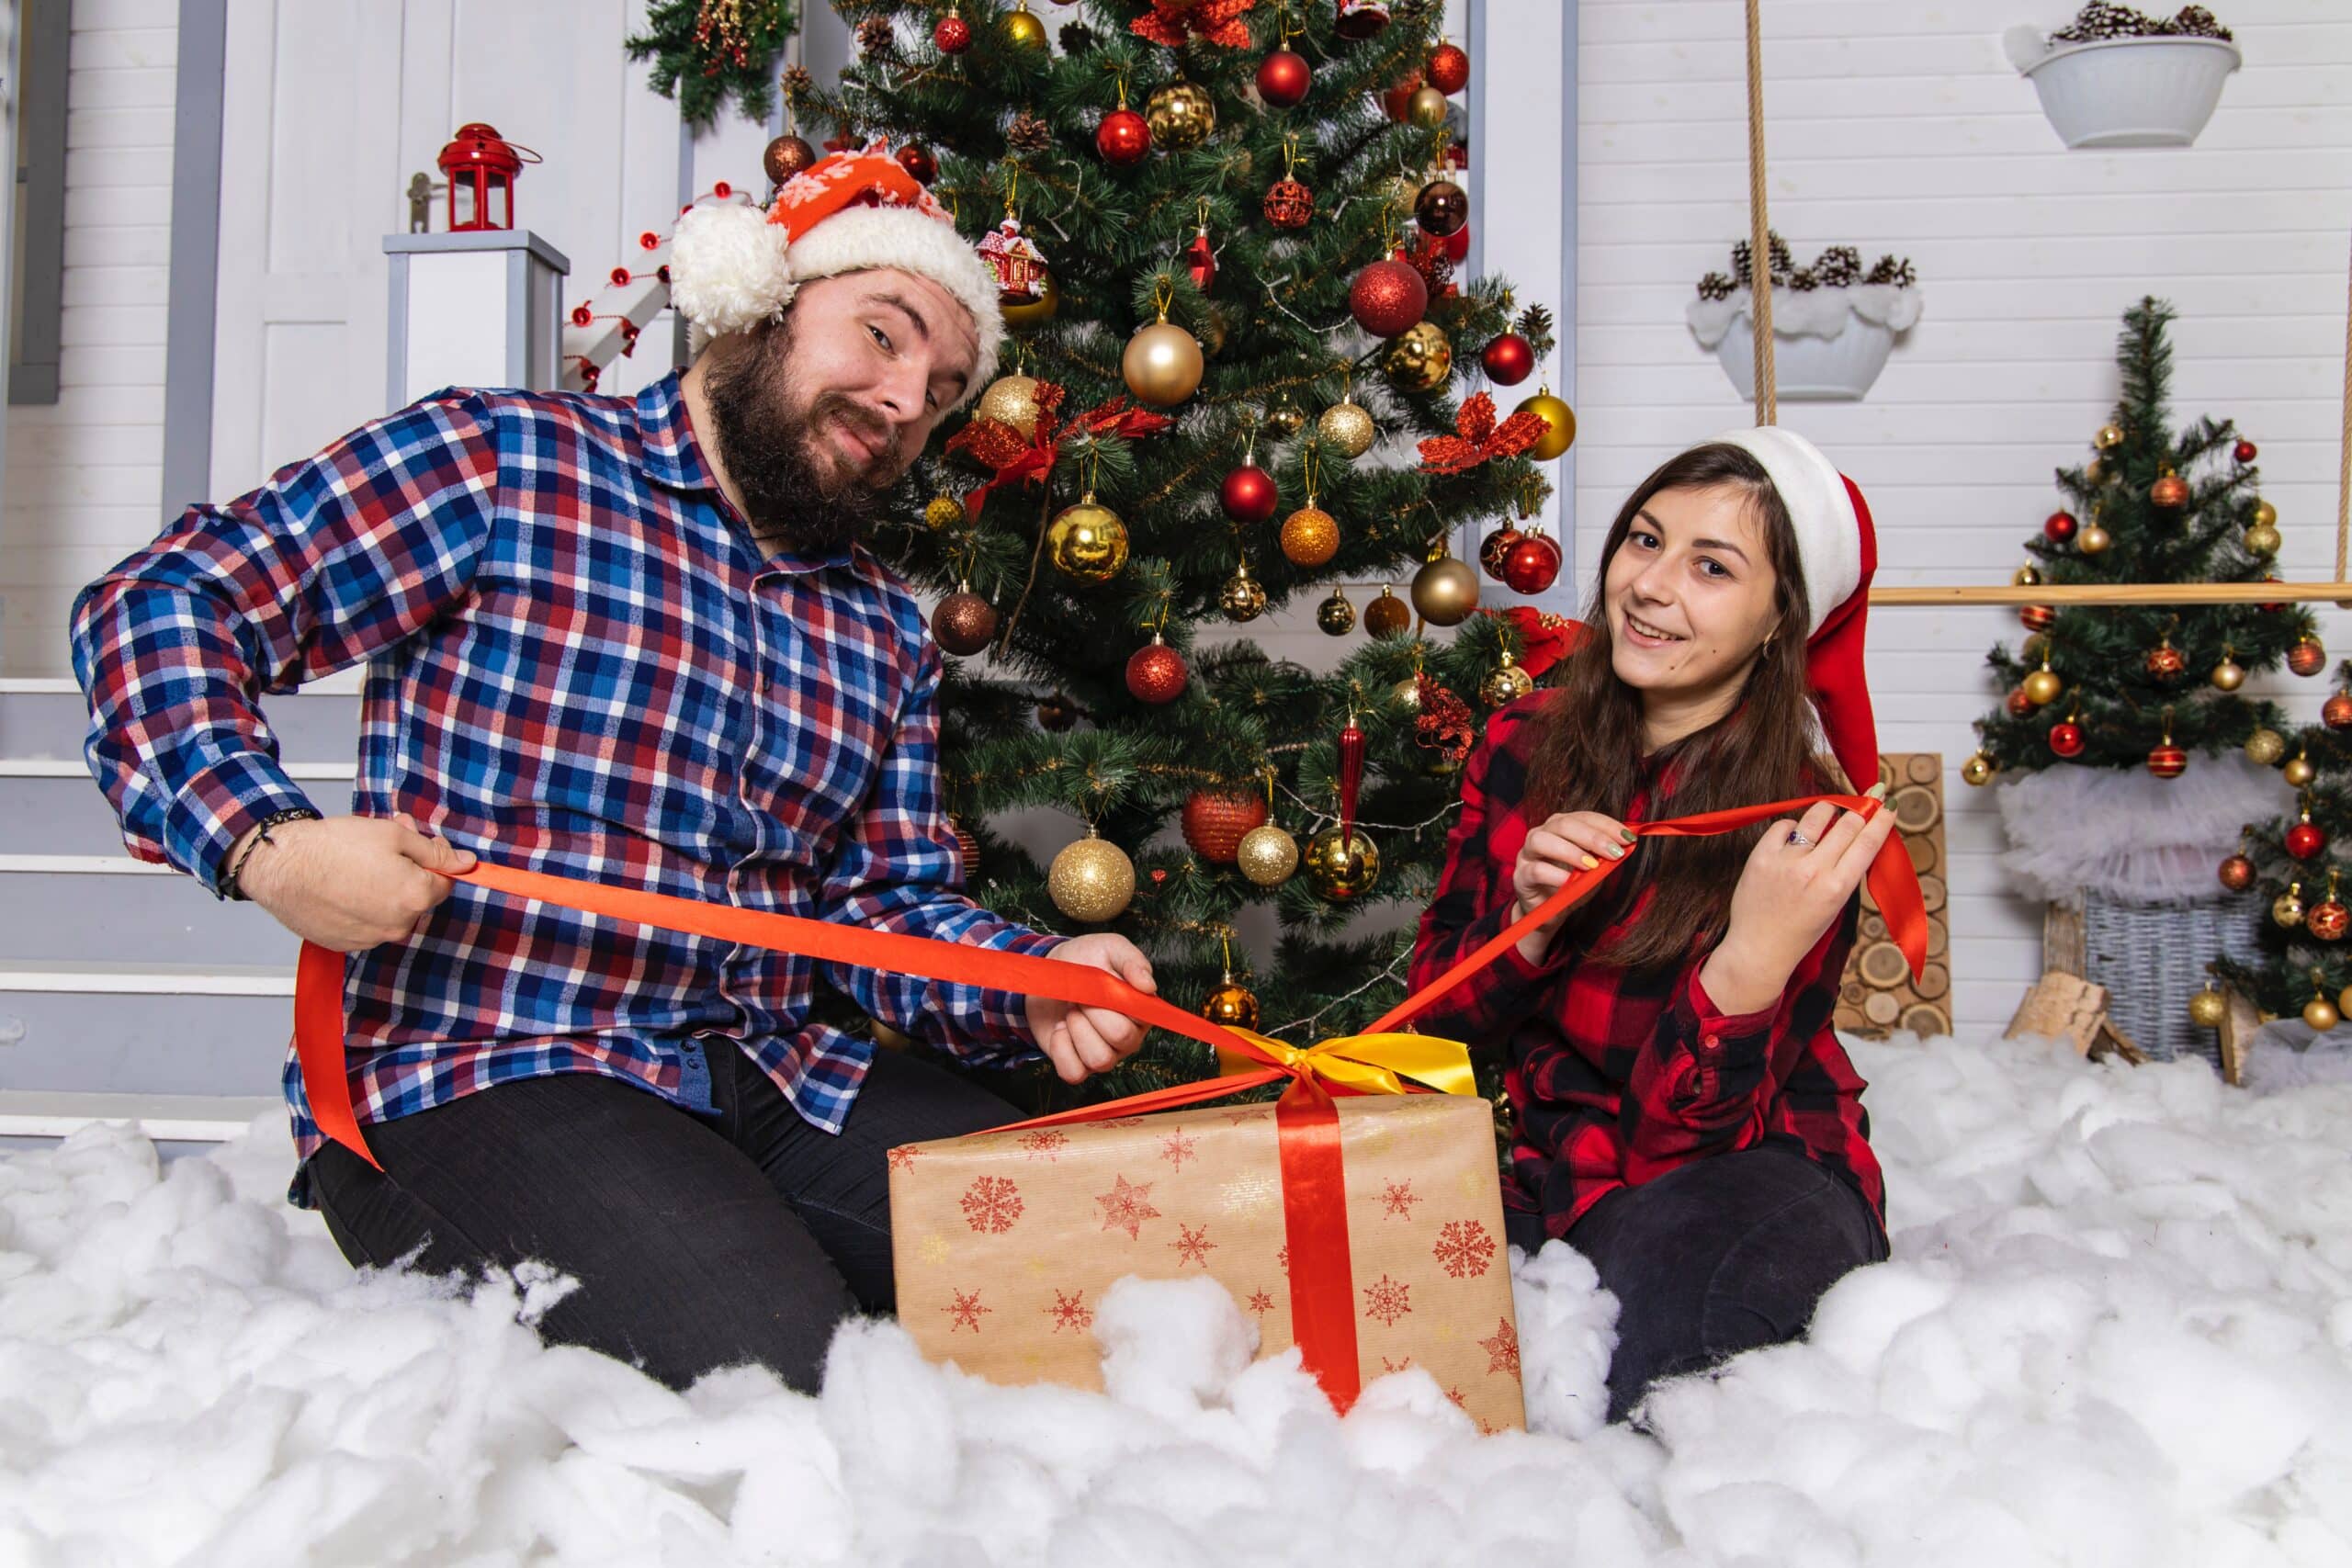 Best Christmas Gifts for Boyfriend